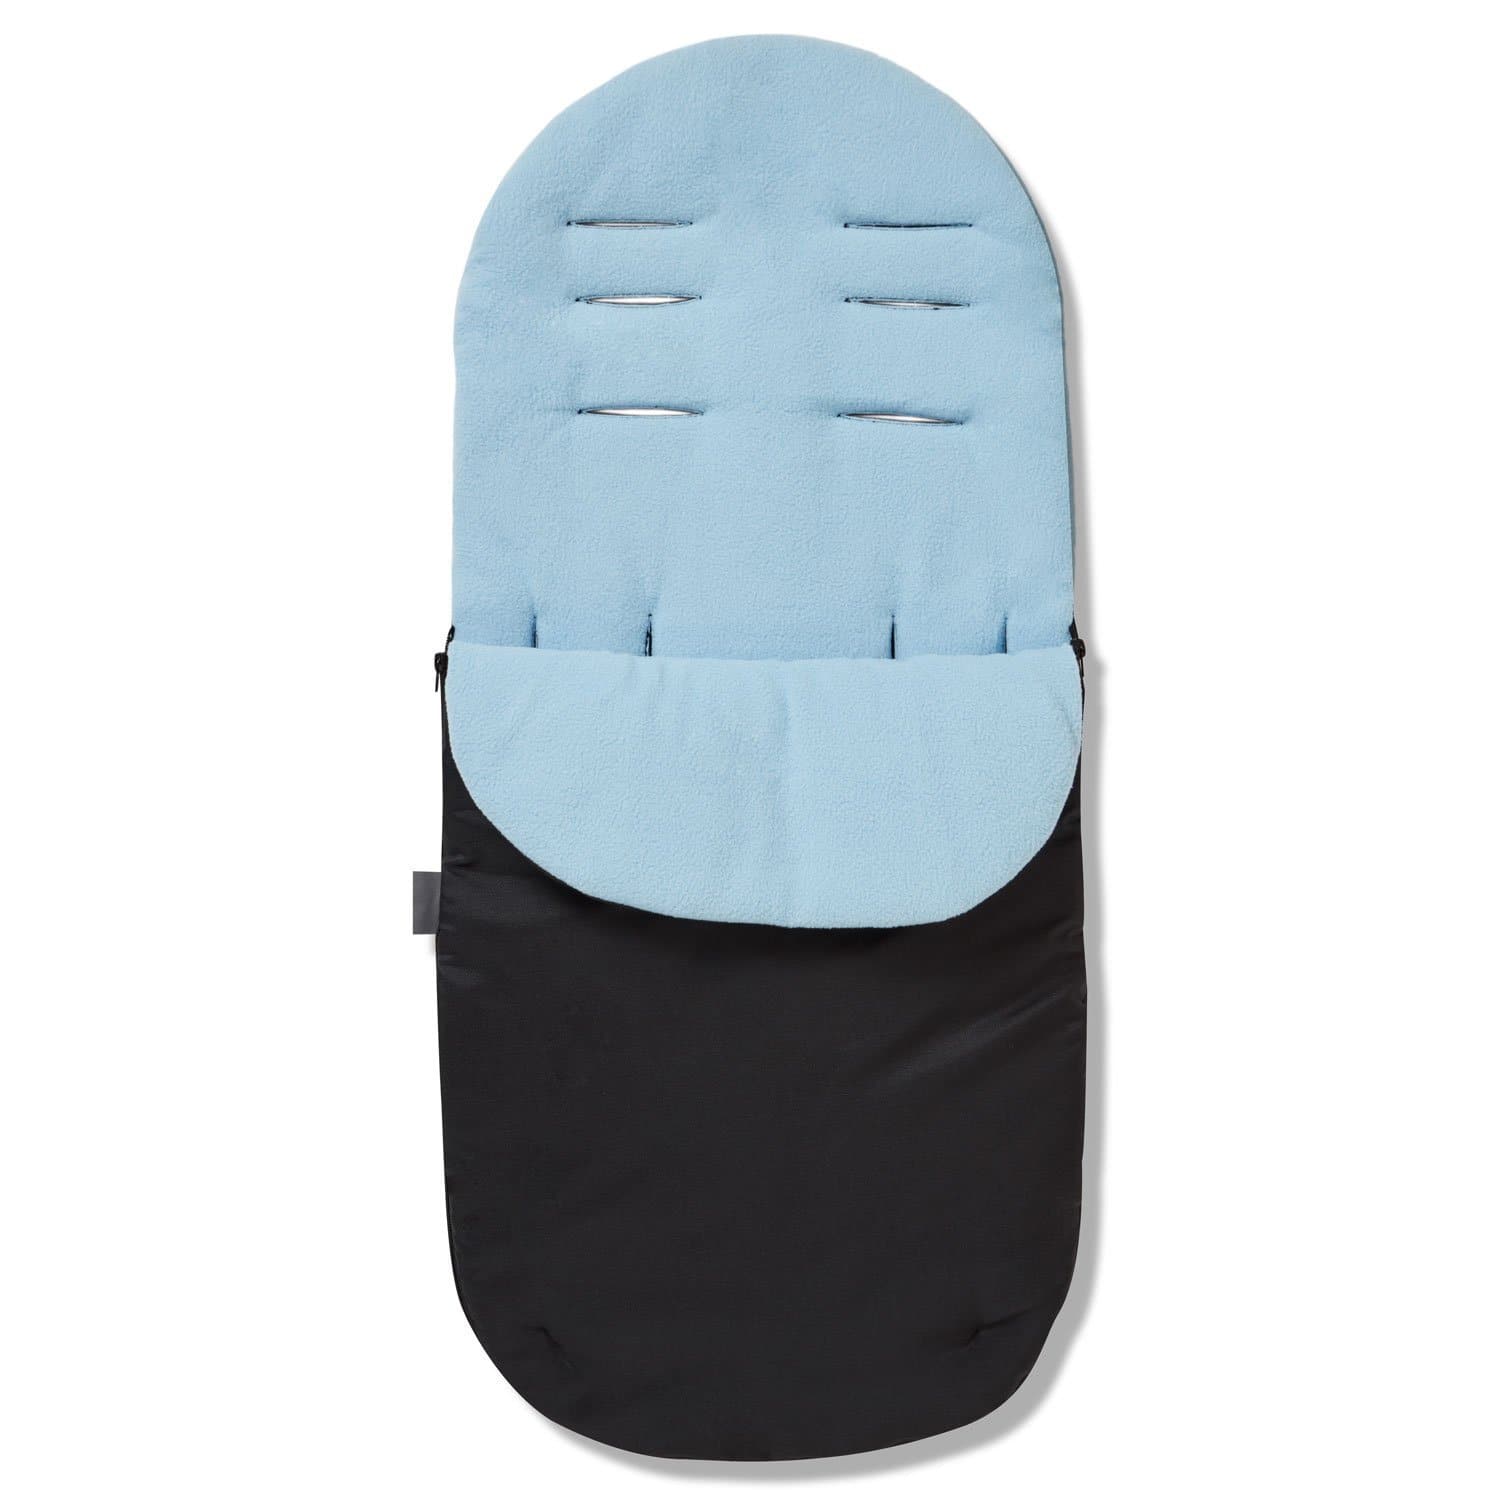 Footmuff / Cosy Toes Compatible with Babywelt - For Your Little One